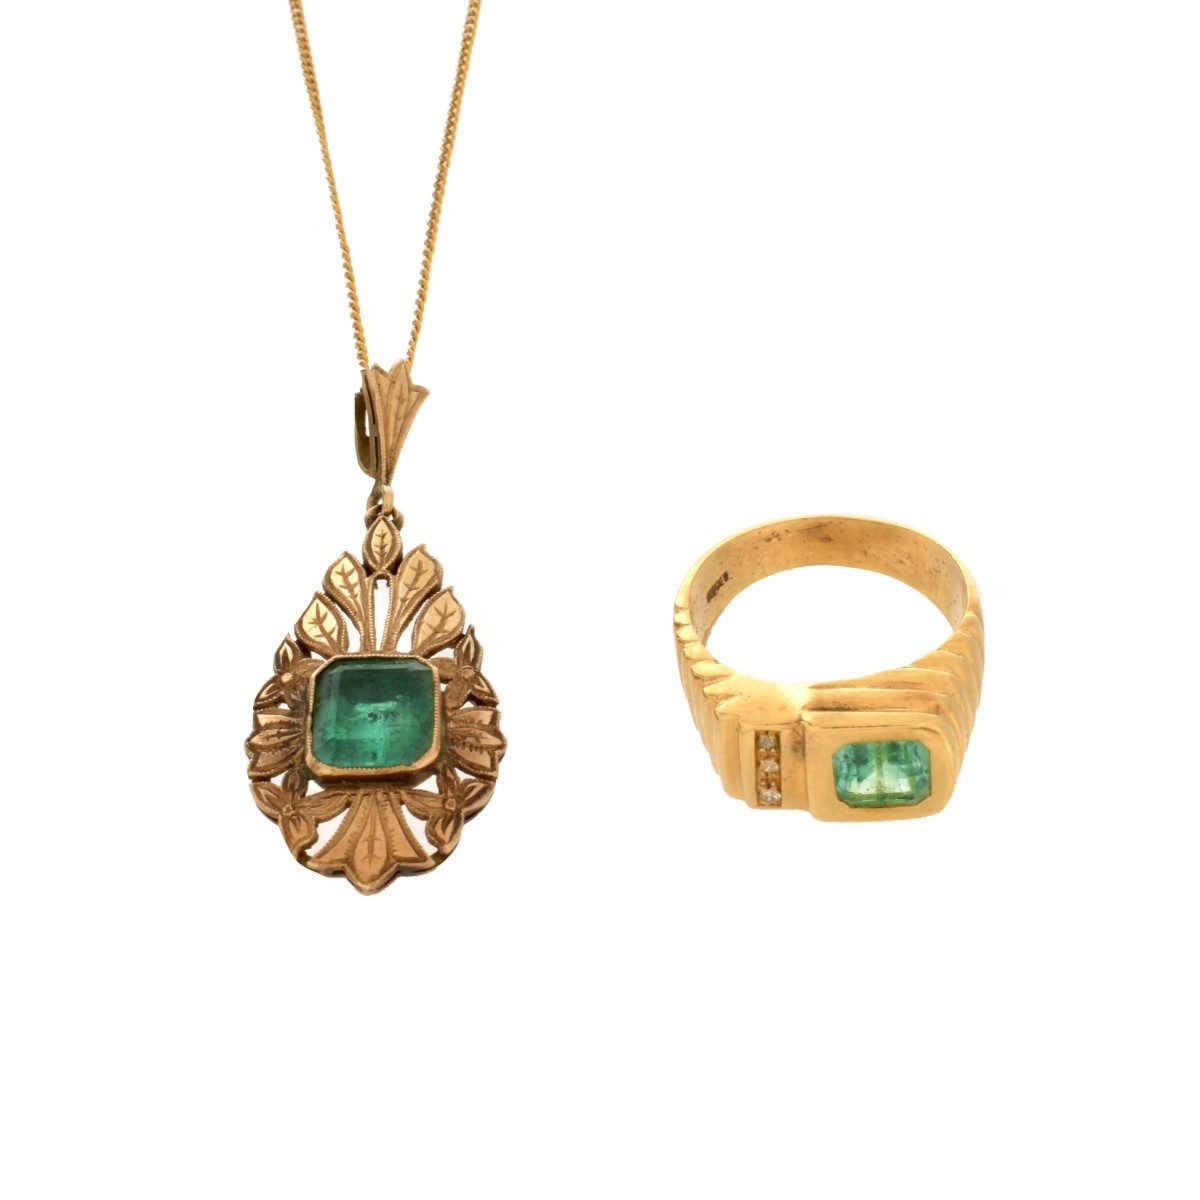 Emerald Ring and Pendant Necklace